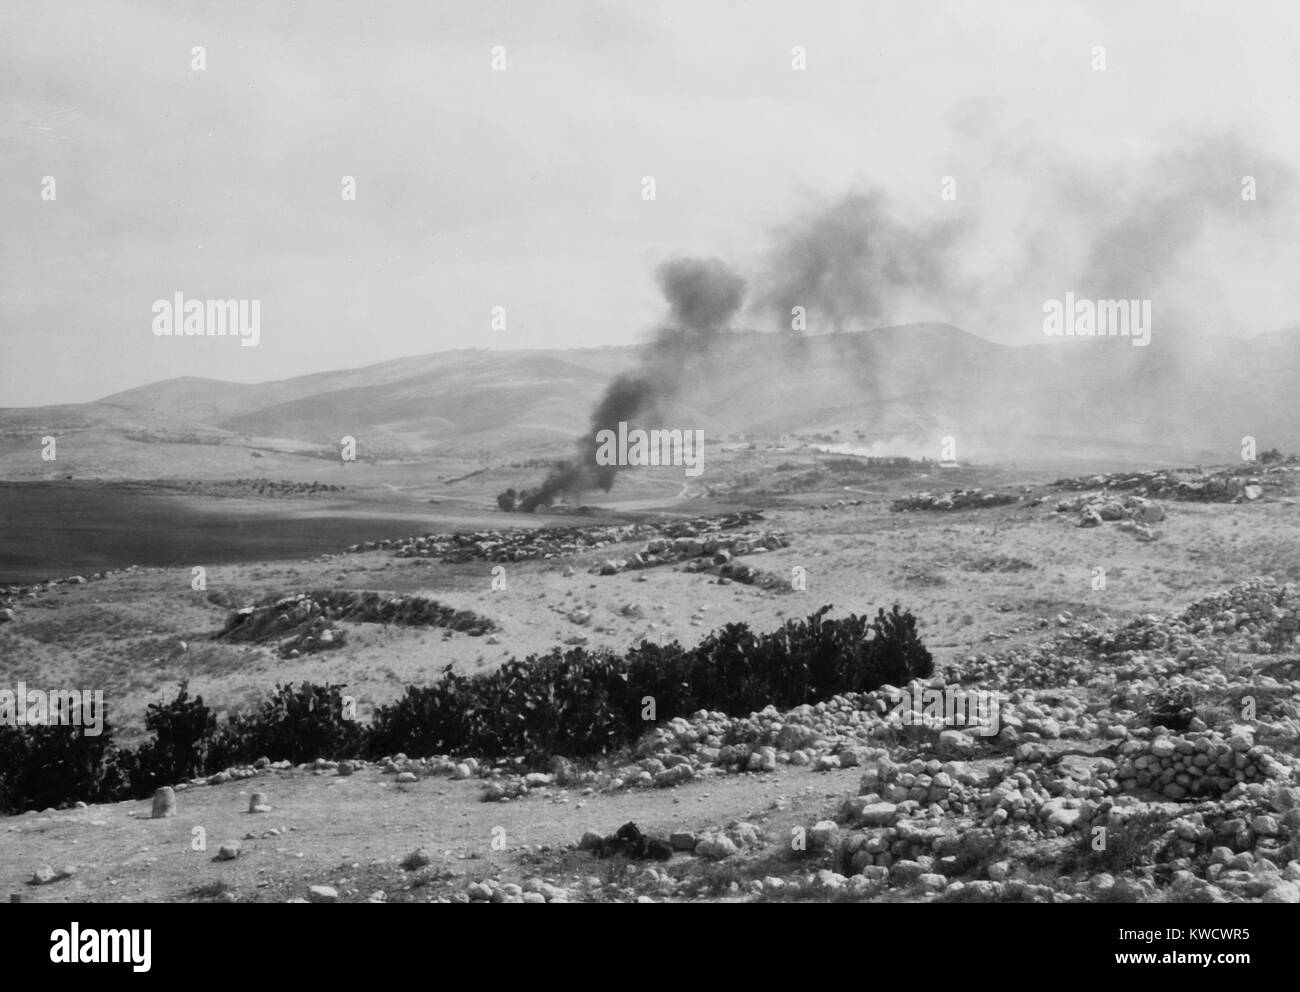 Jewish colony of Artuf in Jerusalem foothills was set on fire by Arabs, Aug. 23-31, 1929. The violent attack was related to the Palestinian riots of 1929, in which 133 Jews and 110 Arabs were killed (BSLOC 2017 1 196) Stock Photo